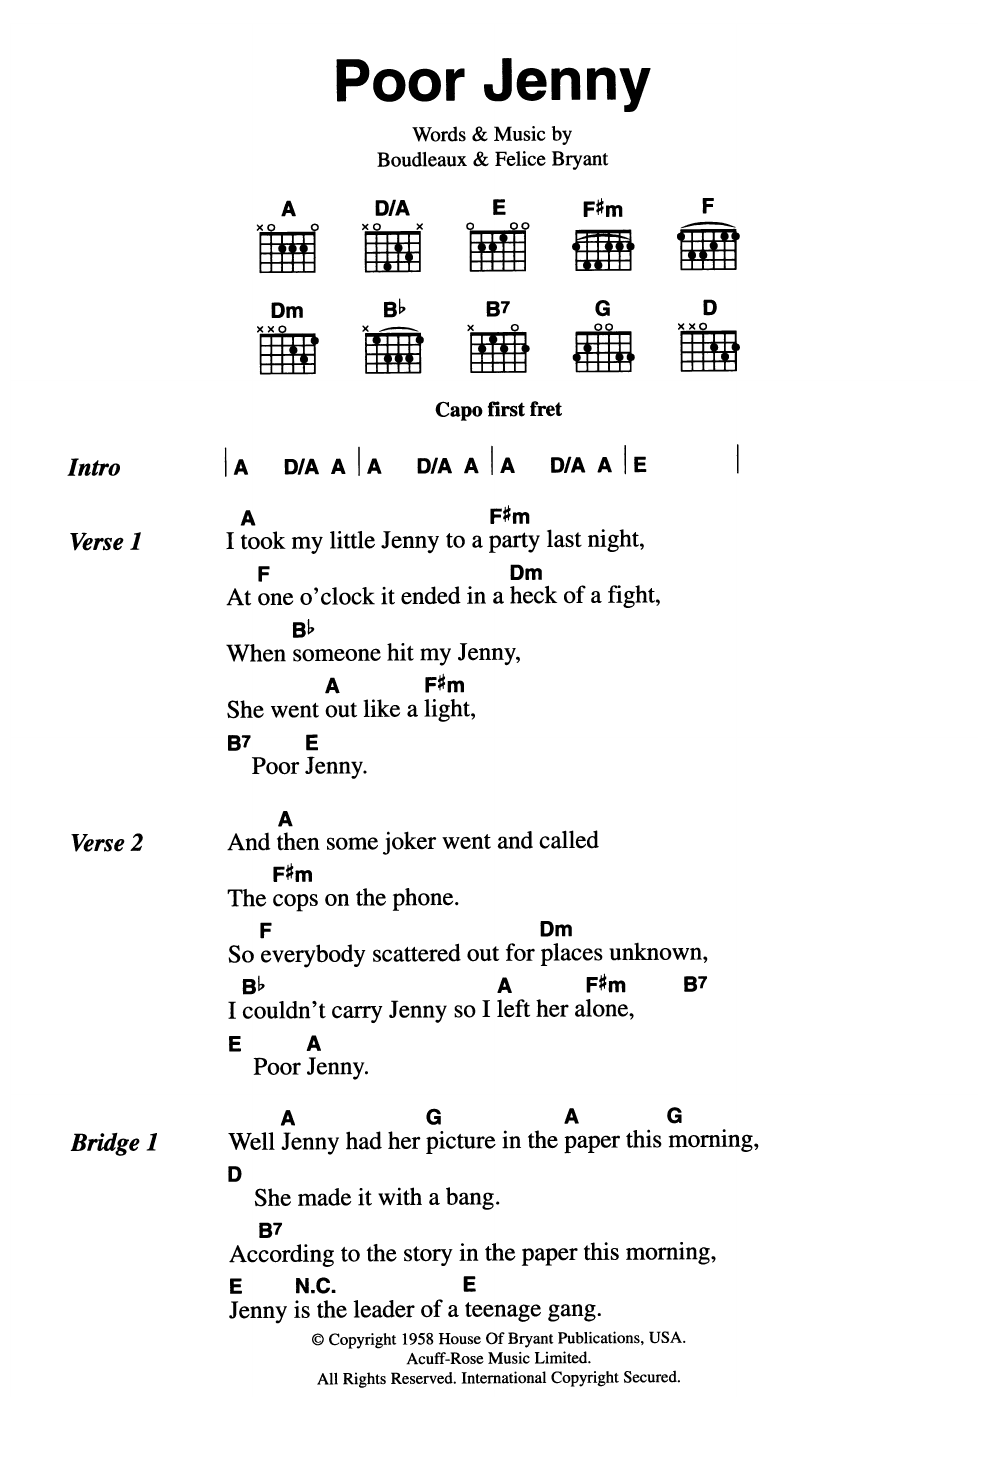 Download The Everly Brothers Poor Jenny Sheet Music